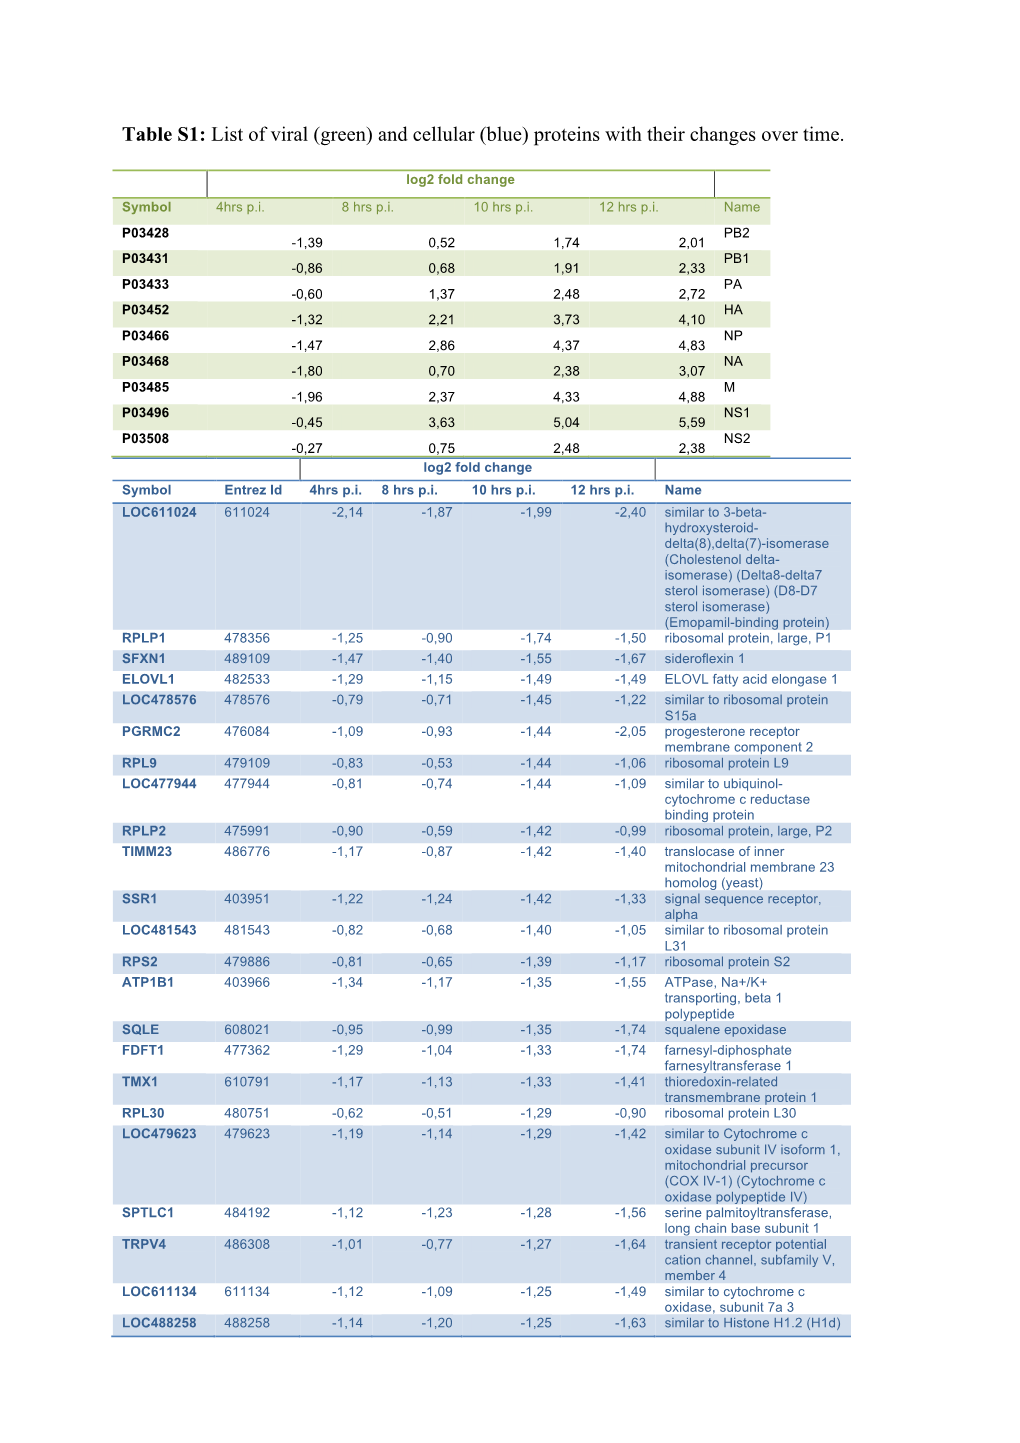 Table S1: List of Viral (Green) and Cellular (Blue) Proteins with Their Changes Over Time